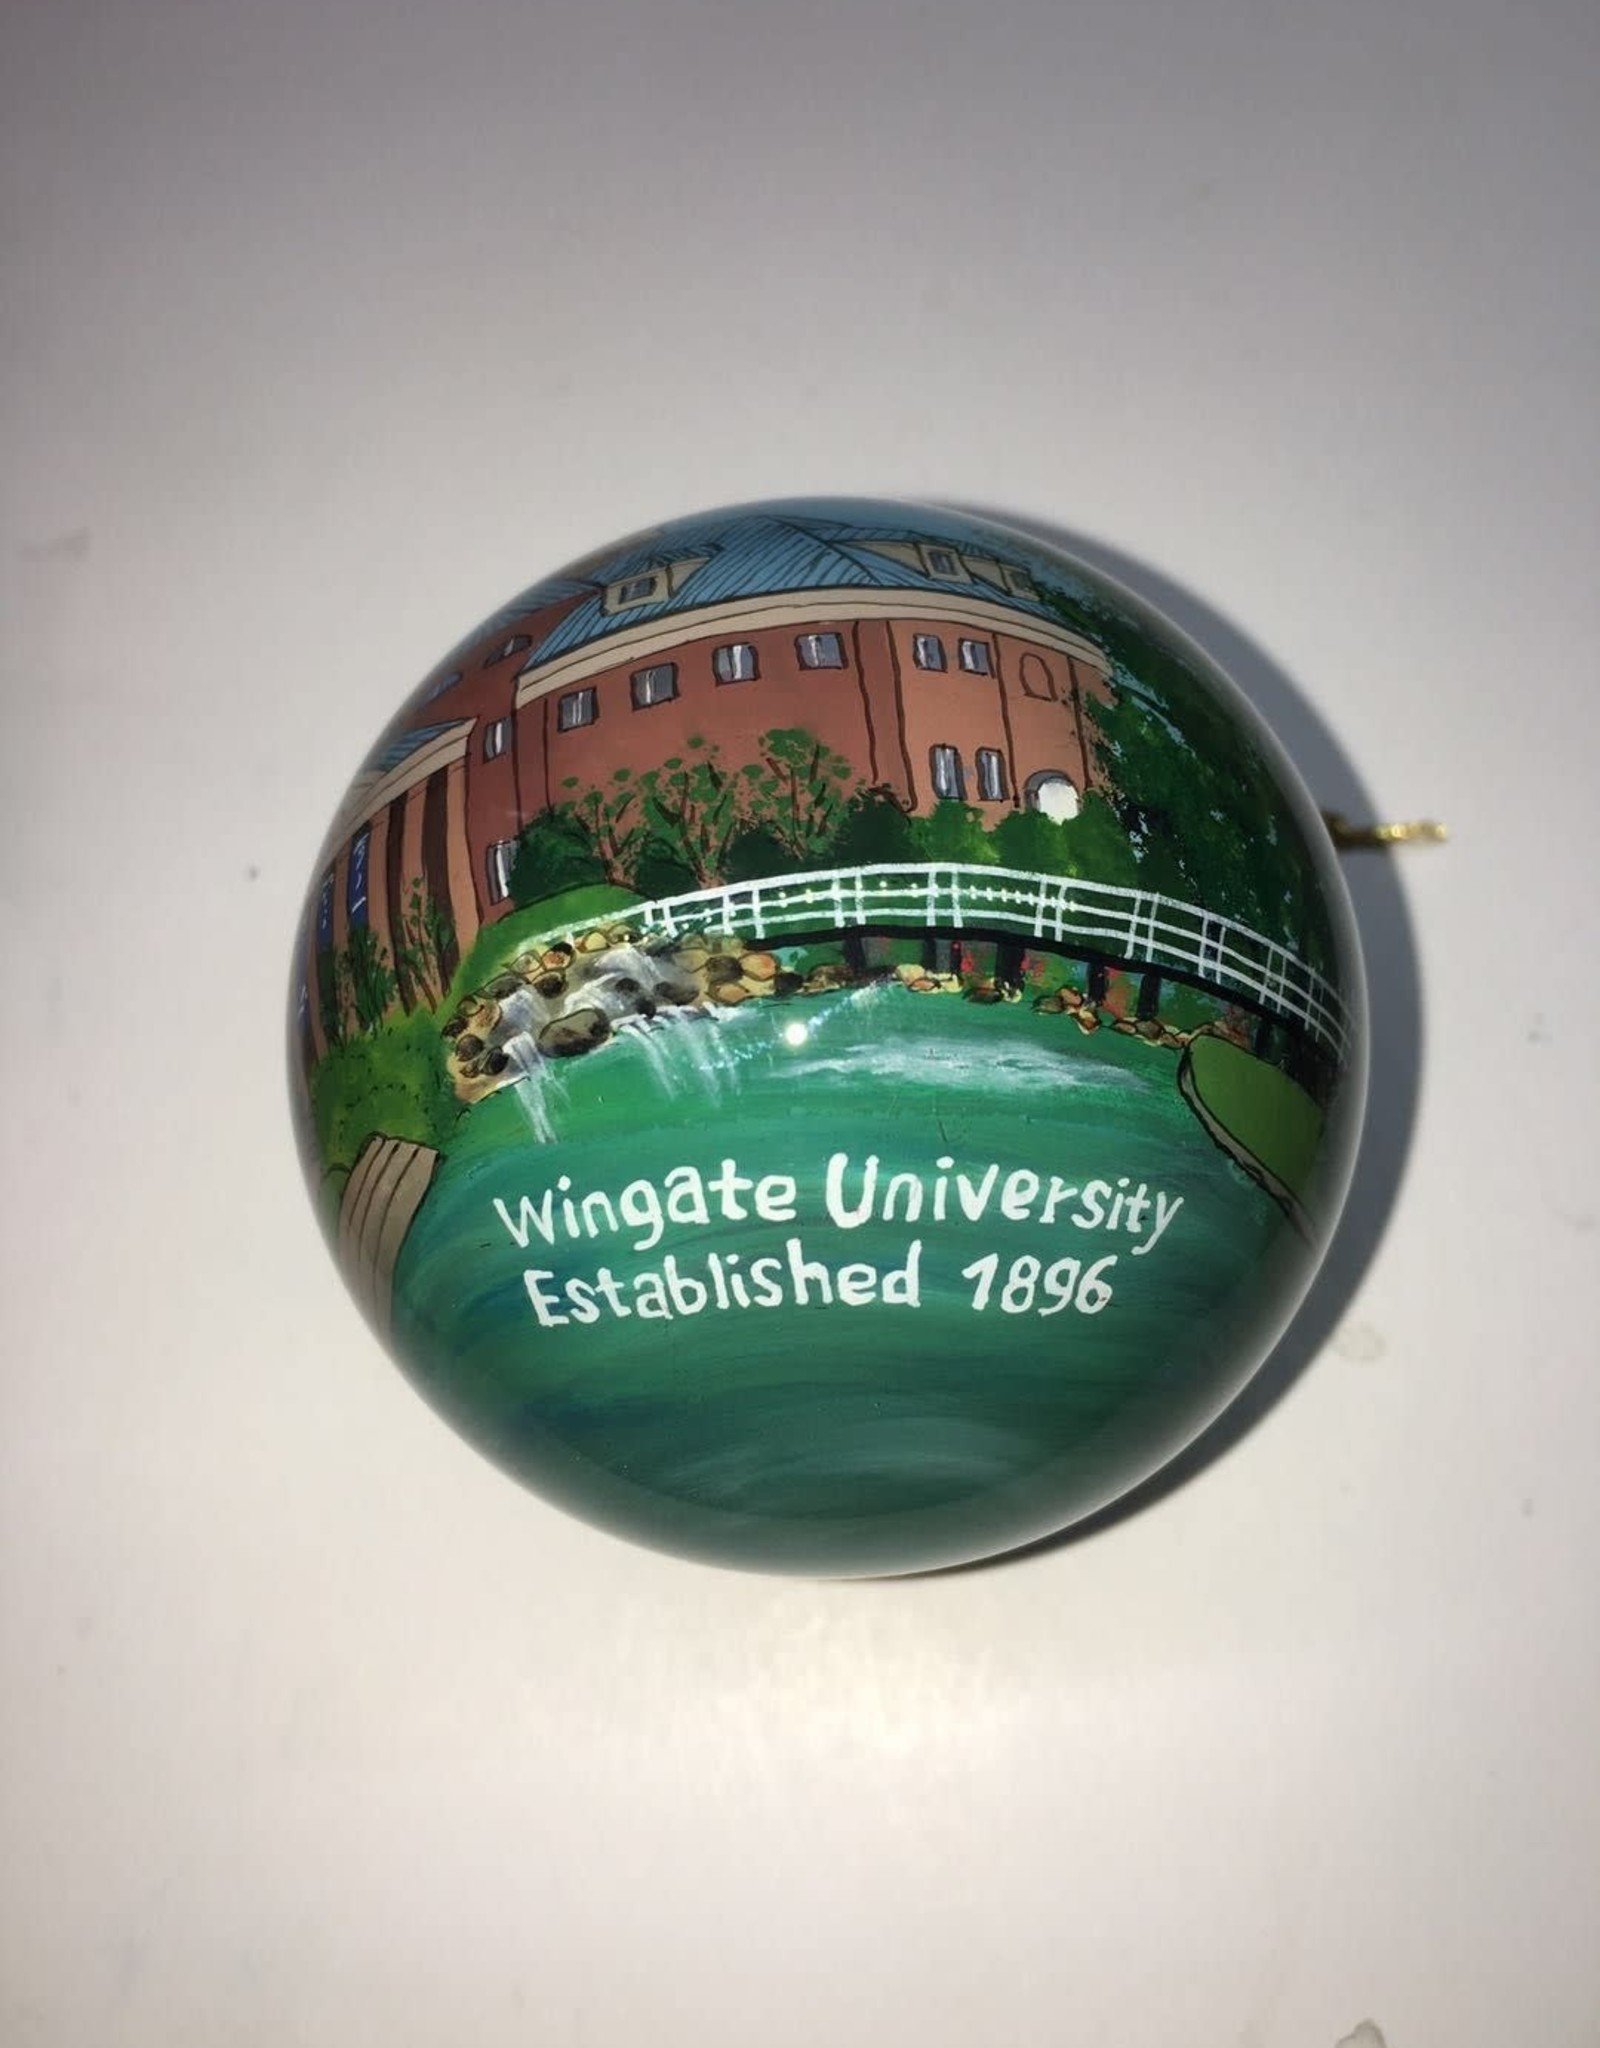 MCM Hand Painted Stegall Ceramic Ball Ornament